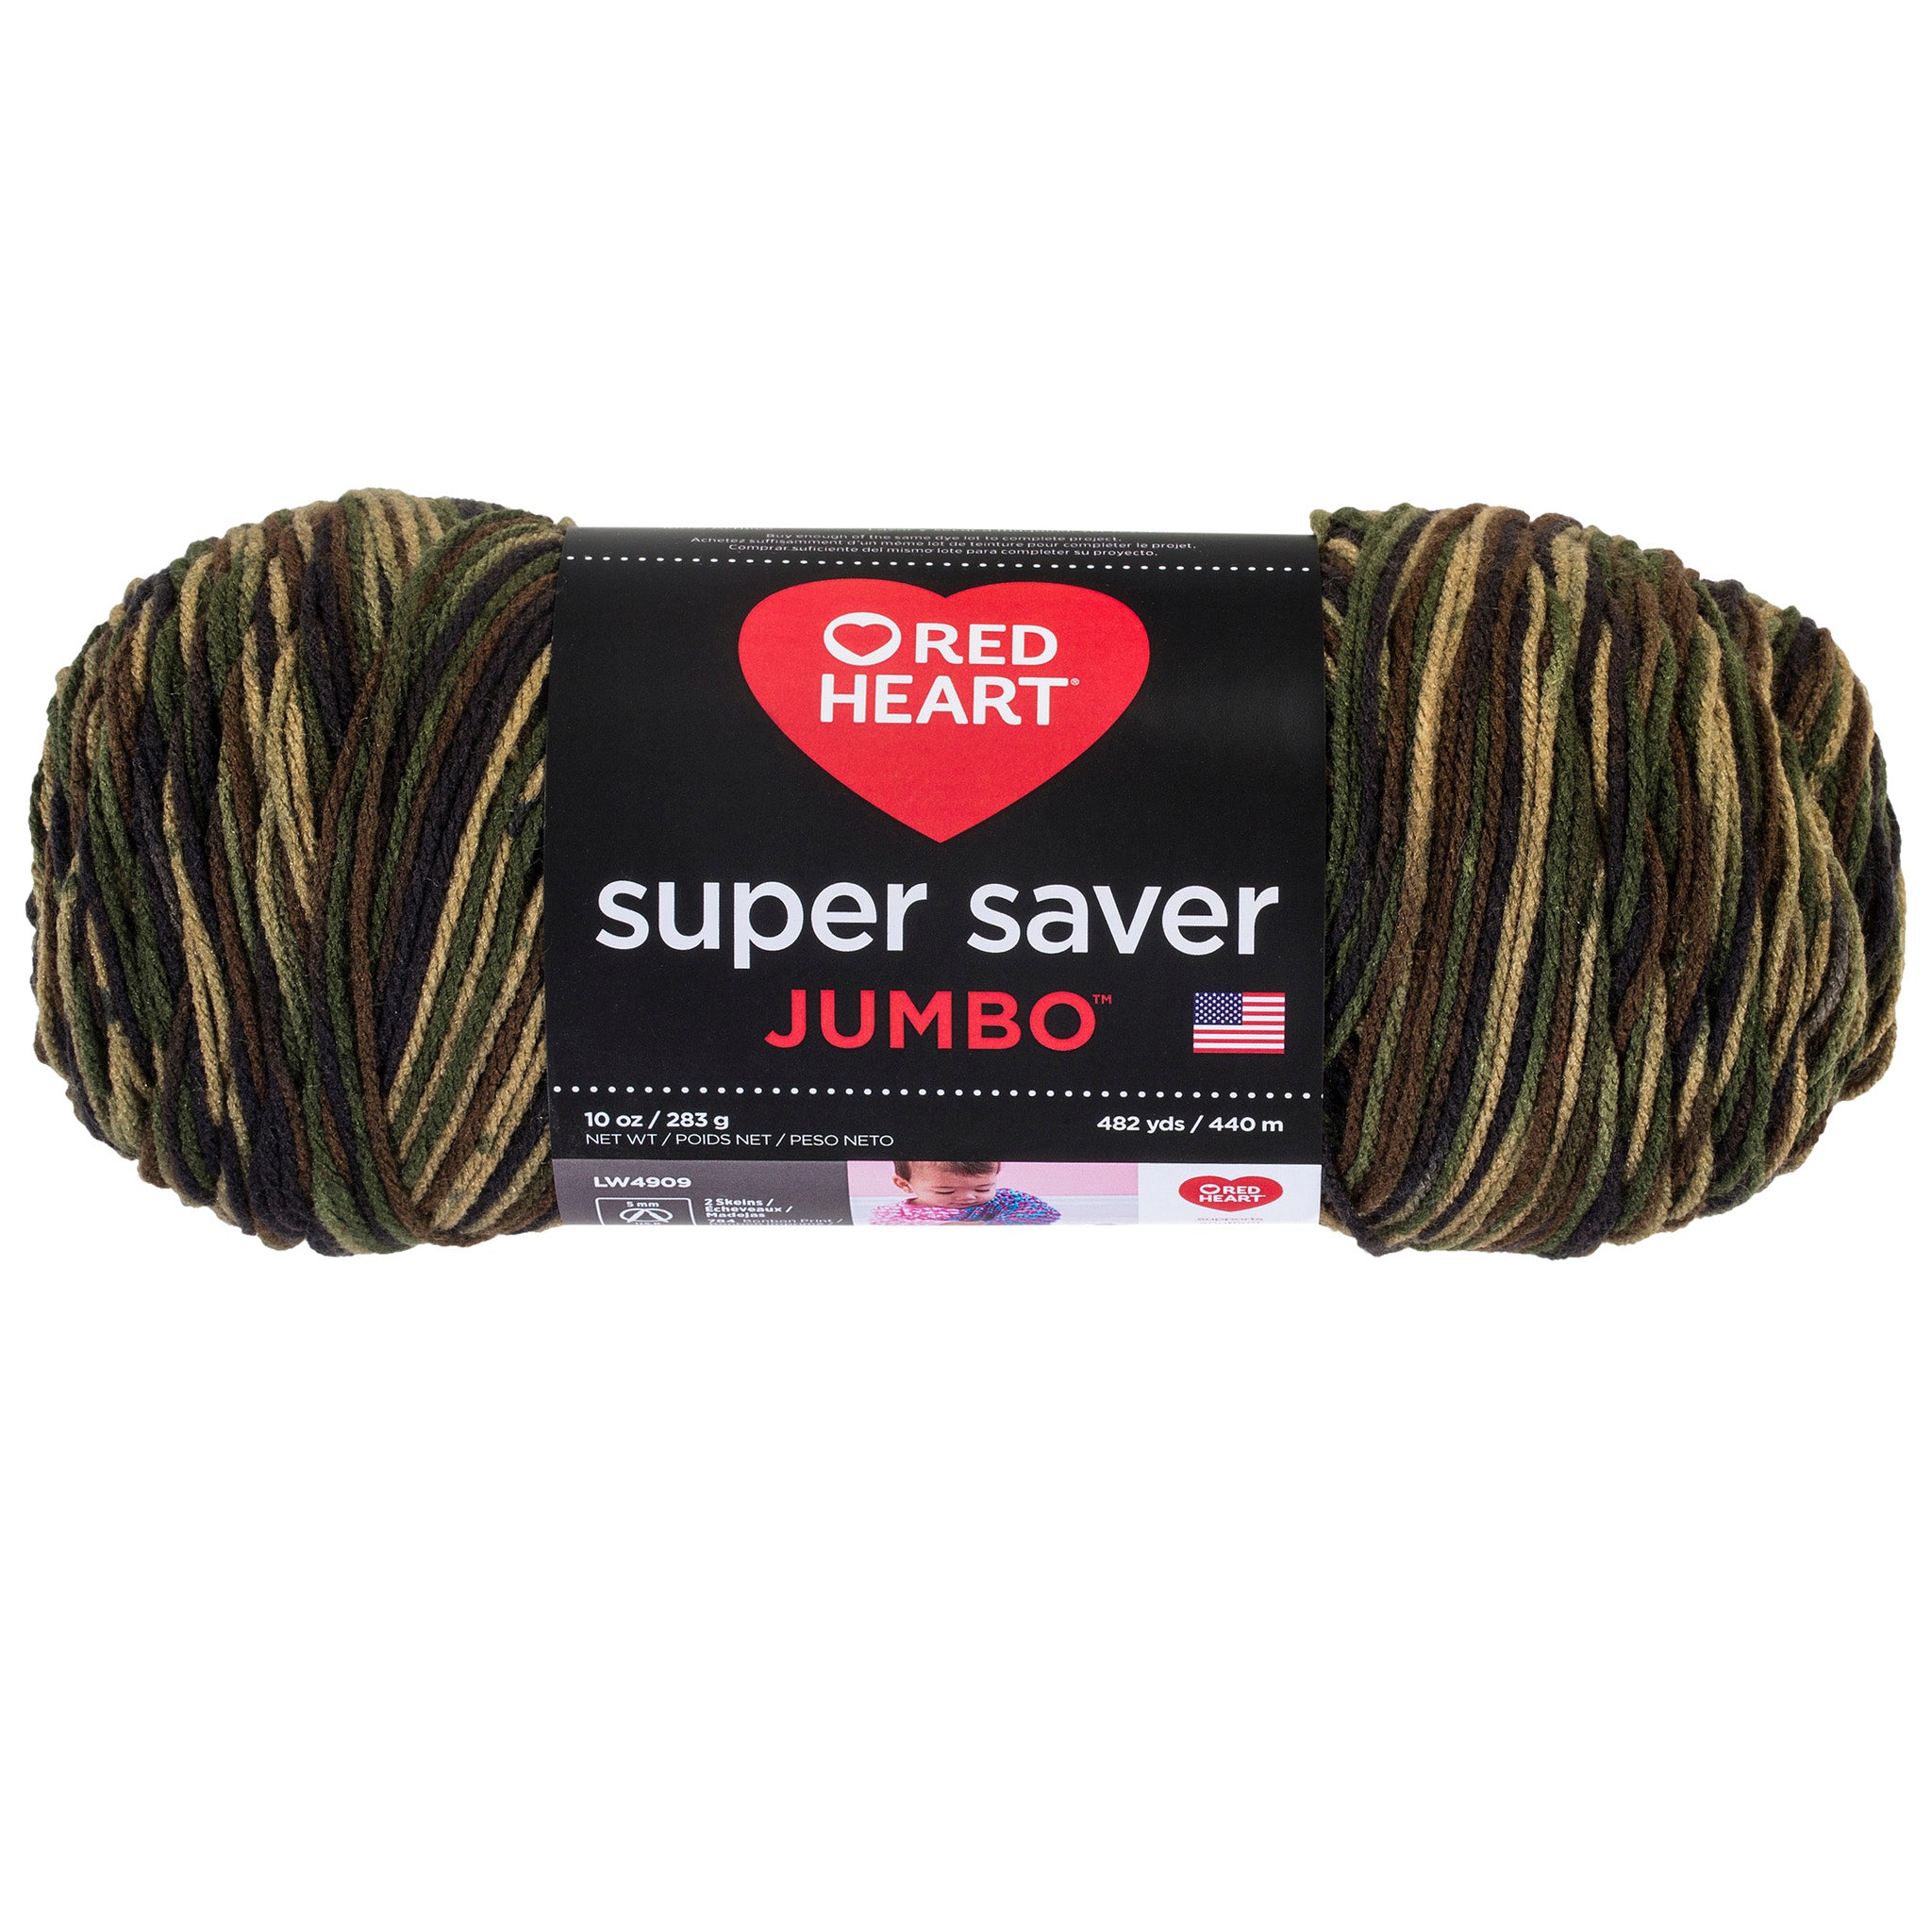 Red Heart Super Saver Yarn - White, Multipack of 6 